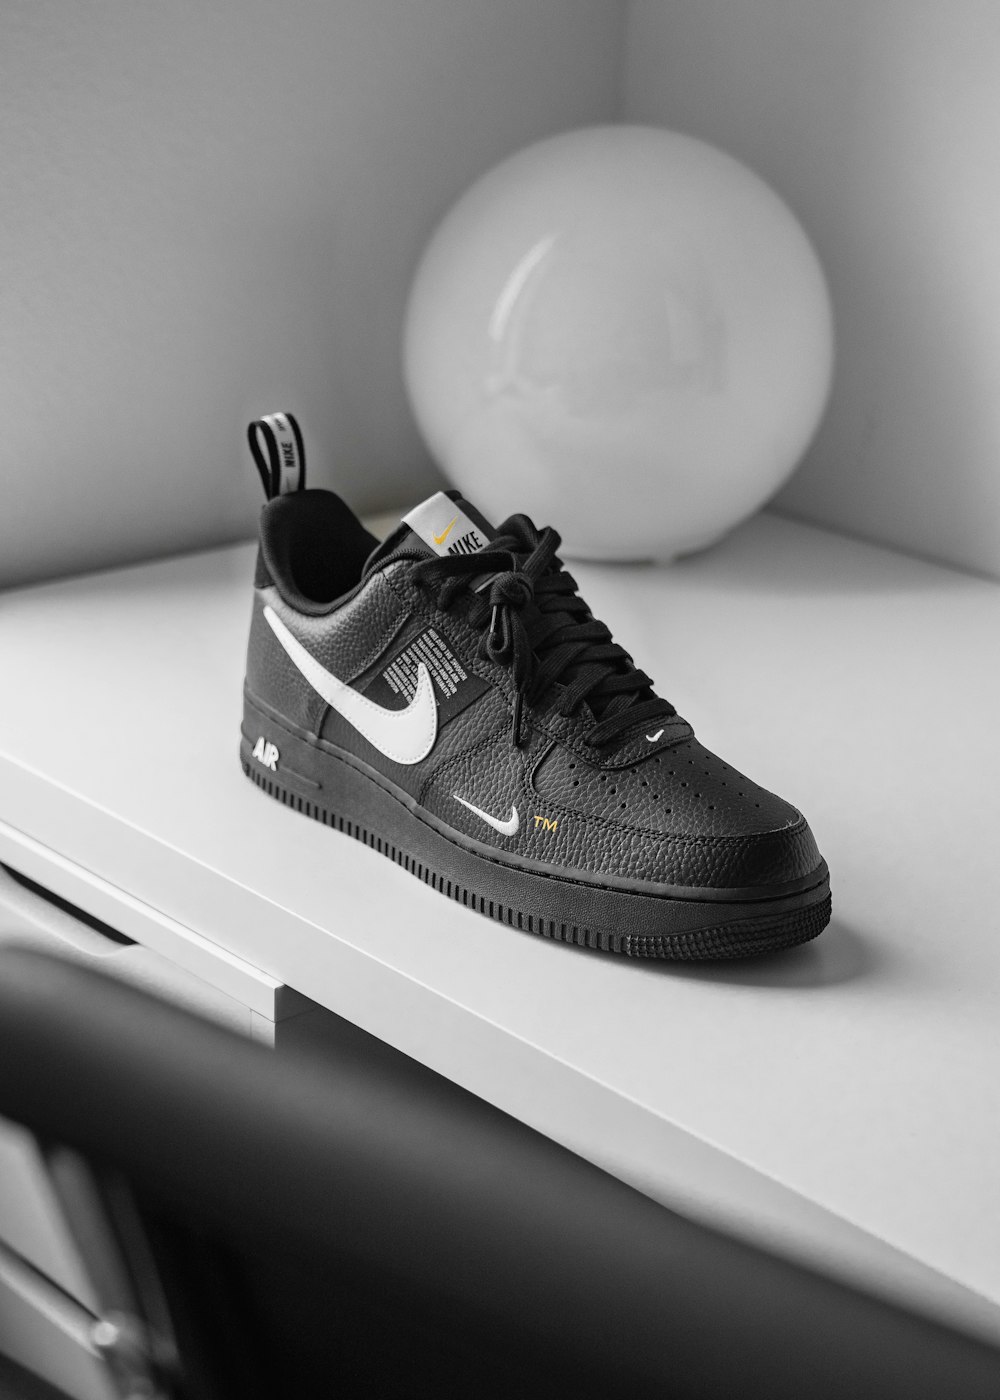 OFF WHITE X Nike Air Force 1 Low-Top-Sneaker